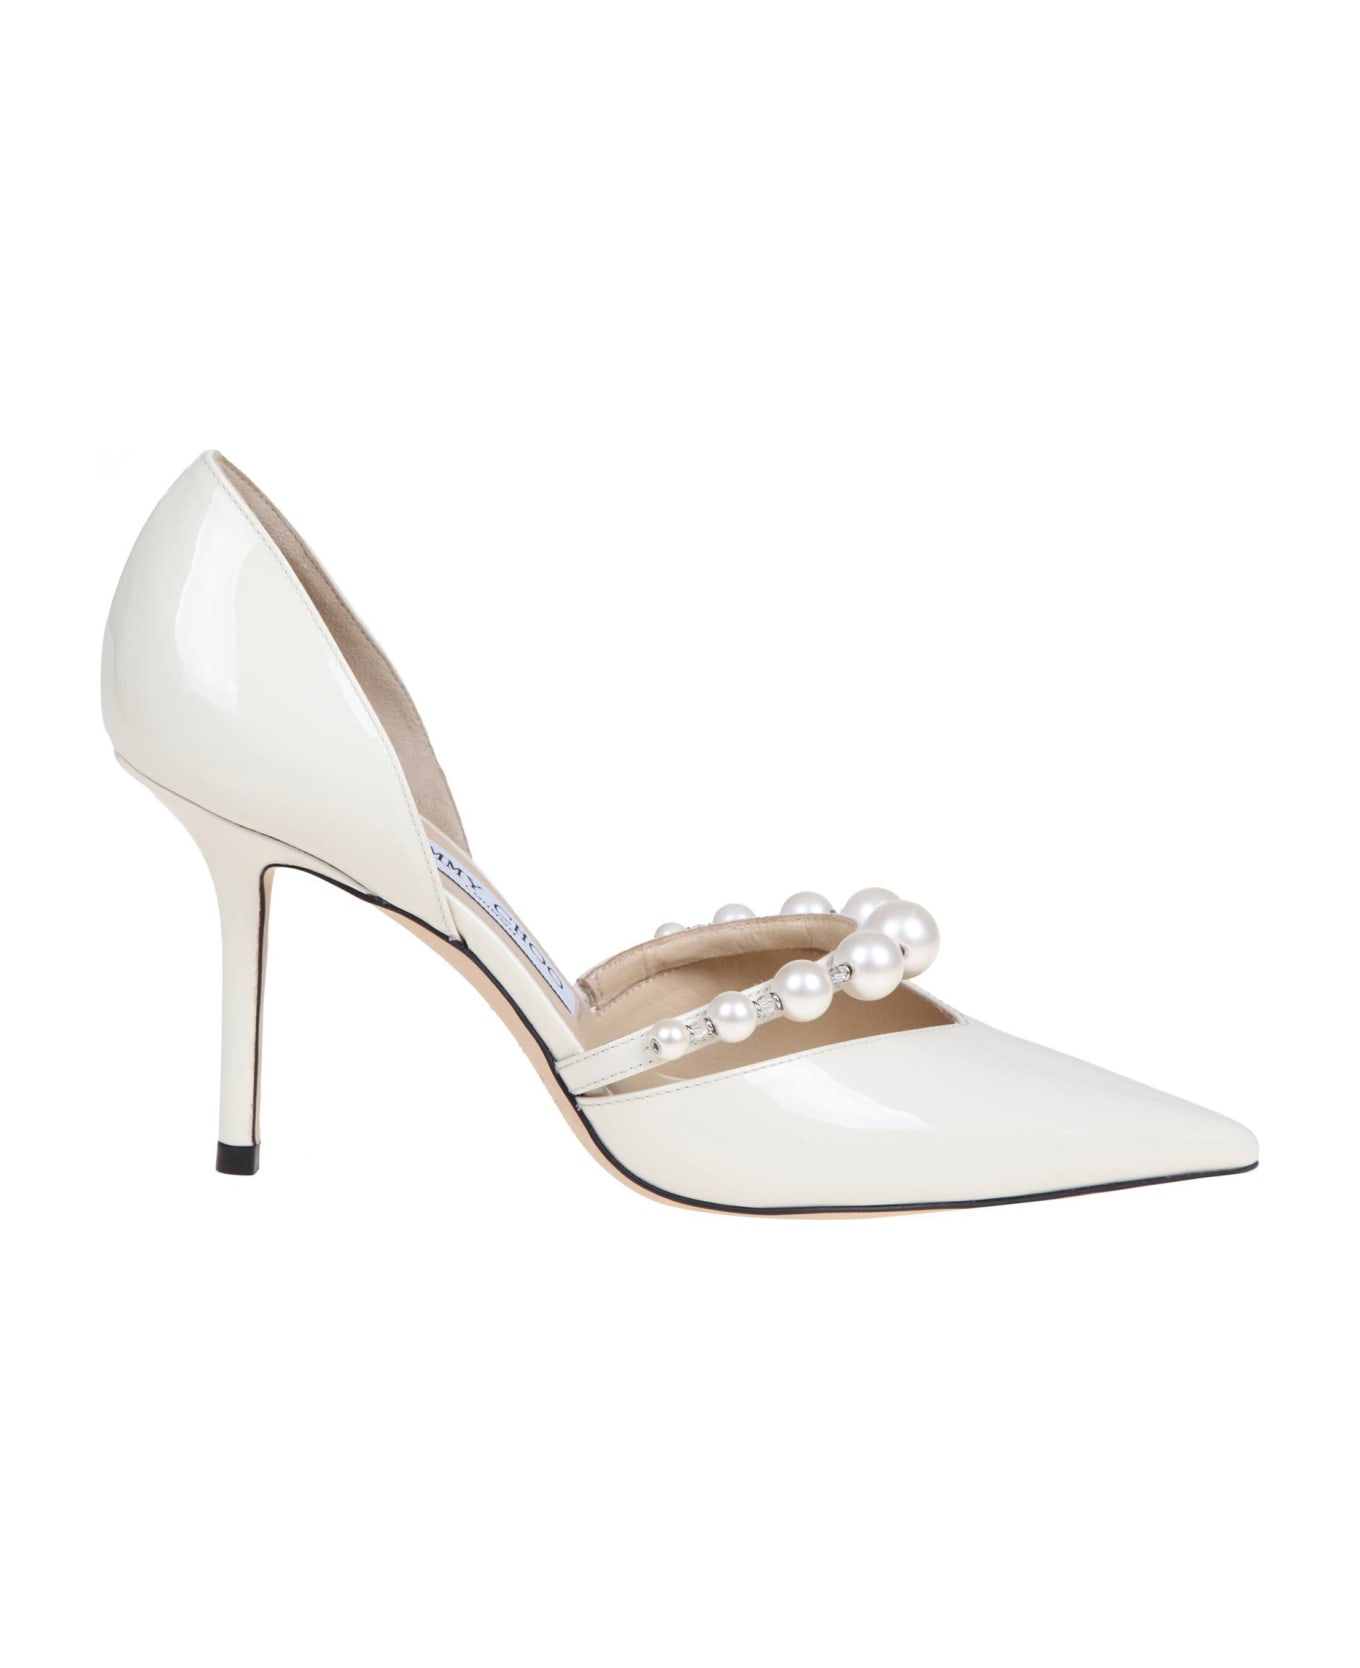 Jimmy Choo Aurelie 85 Patent Leather Pumps With Applied Pearls